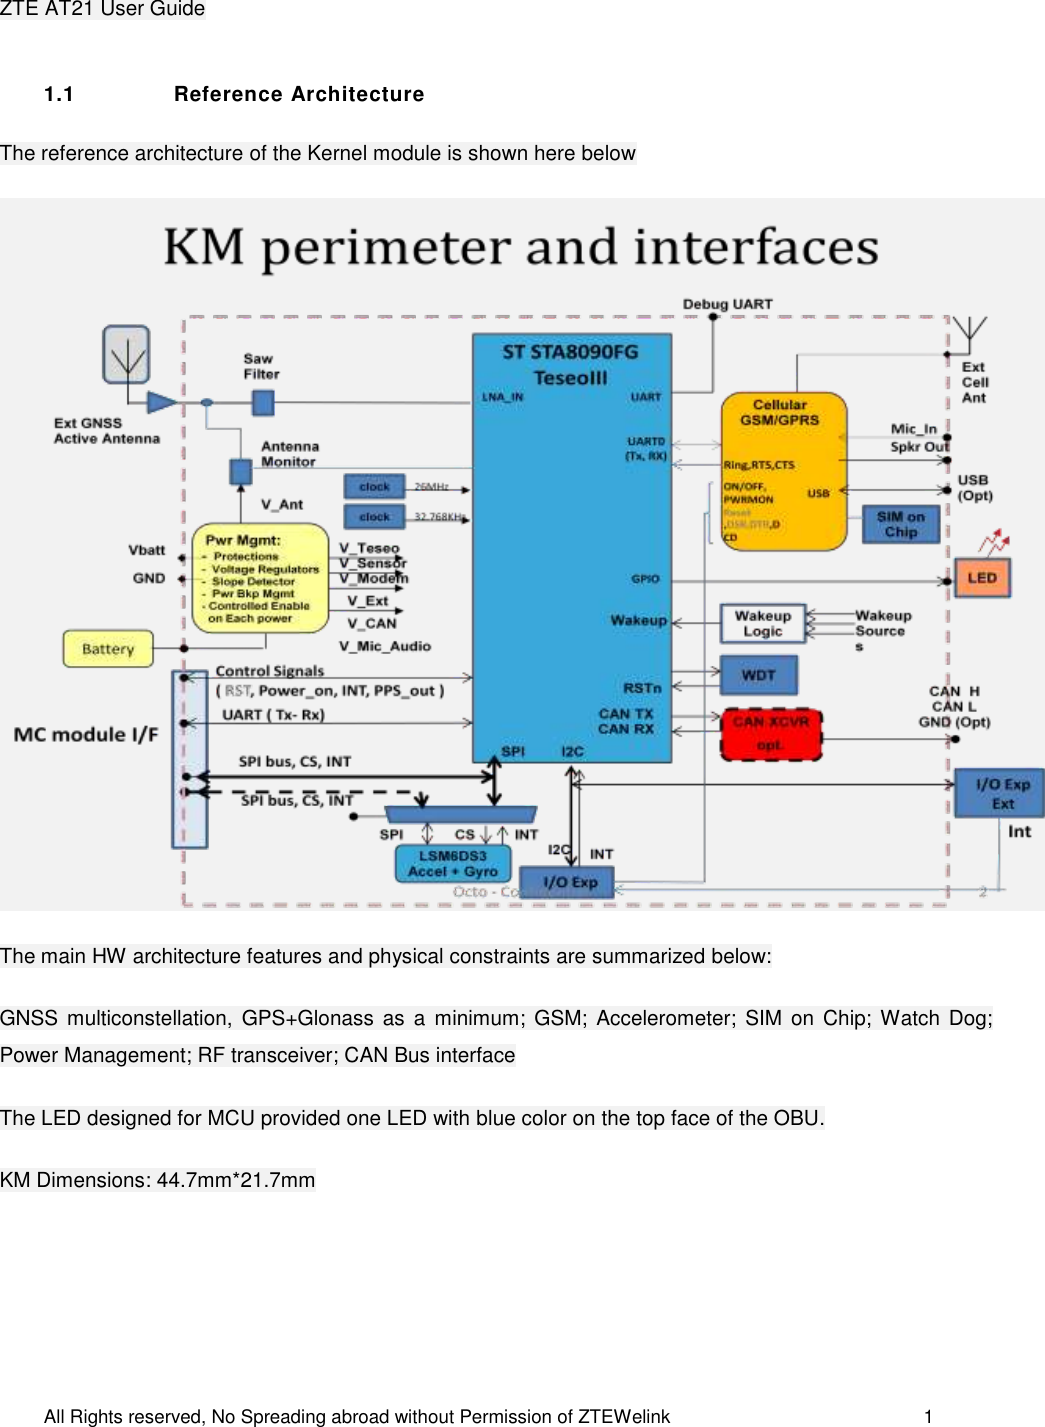  All Rights reserved, No Spreading abroad without Permission of ZTEWelink                                                      1 ZTE AT21 User Guide 1.1  Reference Architecture The reference architecture of the Kernel module is shown here below  The main HW architecture features and physical constraints are summarized below: GNSS multiconstellation,  GPS+Glonass  as  a  minimum;  GSM;  Accelerometer;  SIM  on  Chip; Watch Dog; Power Management; RF transceiver; CAN Bus interface The LED designed for MCU provided one LED with blue color on the top face of the OBU. KM Dimensions: 44.7mm*21.7mm  